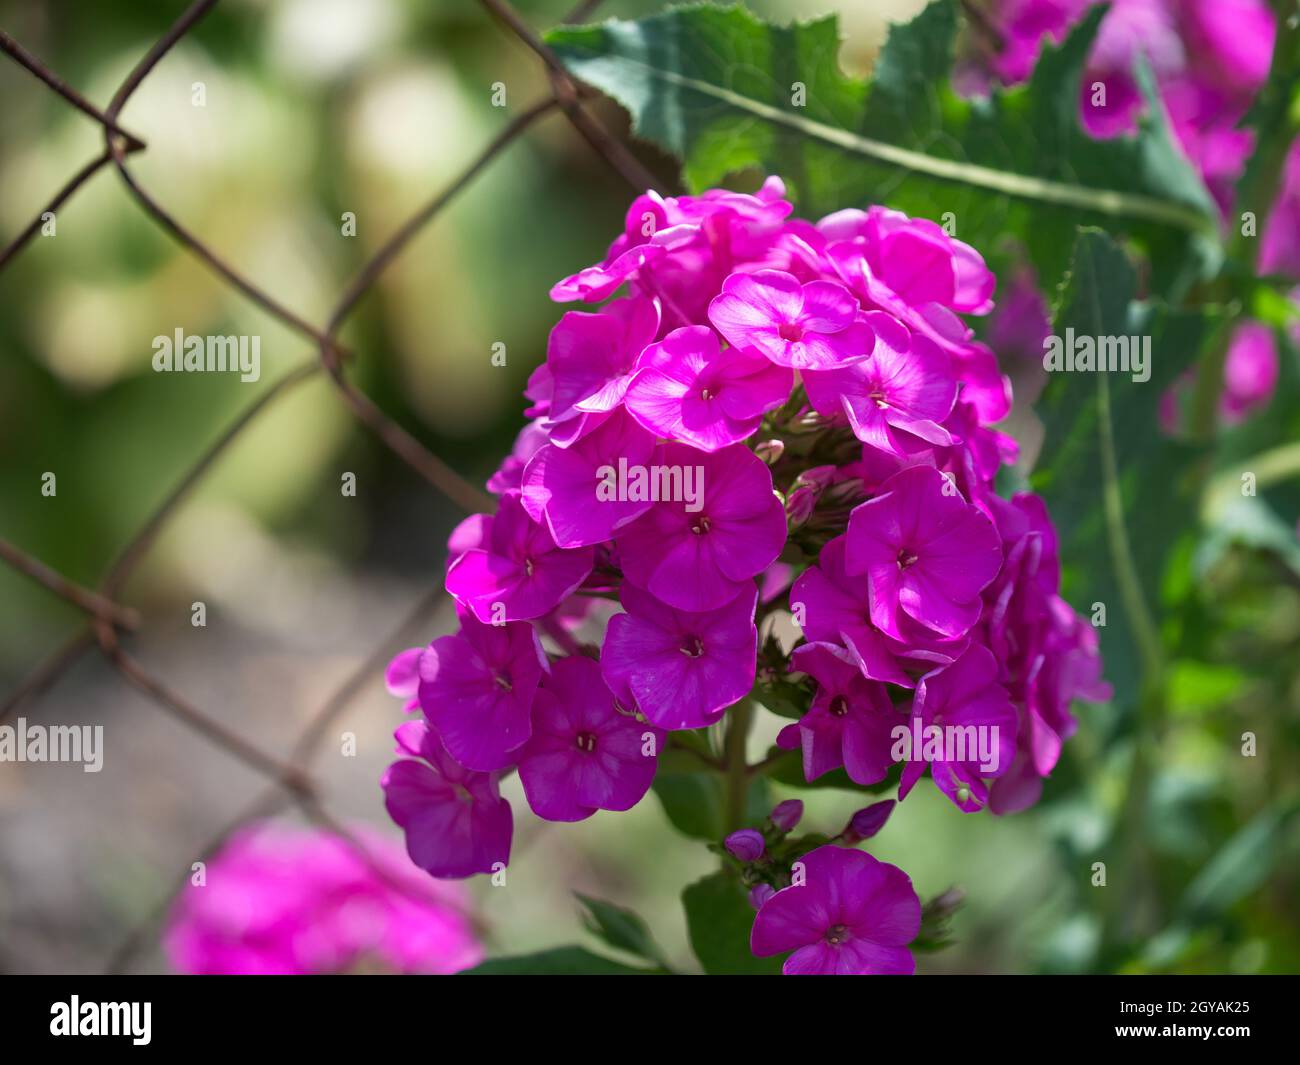 Inflorescence of pink phlox flowers close-up. Lots of pink flowers. Stock Photo